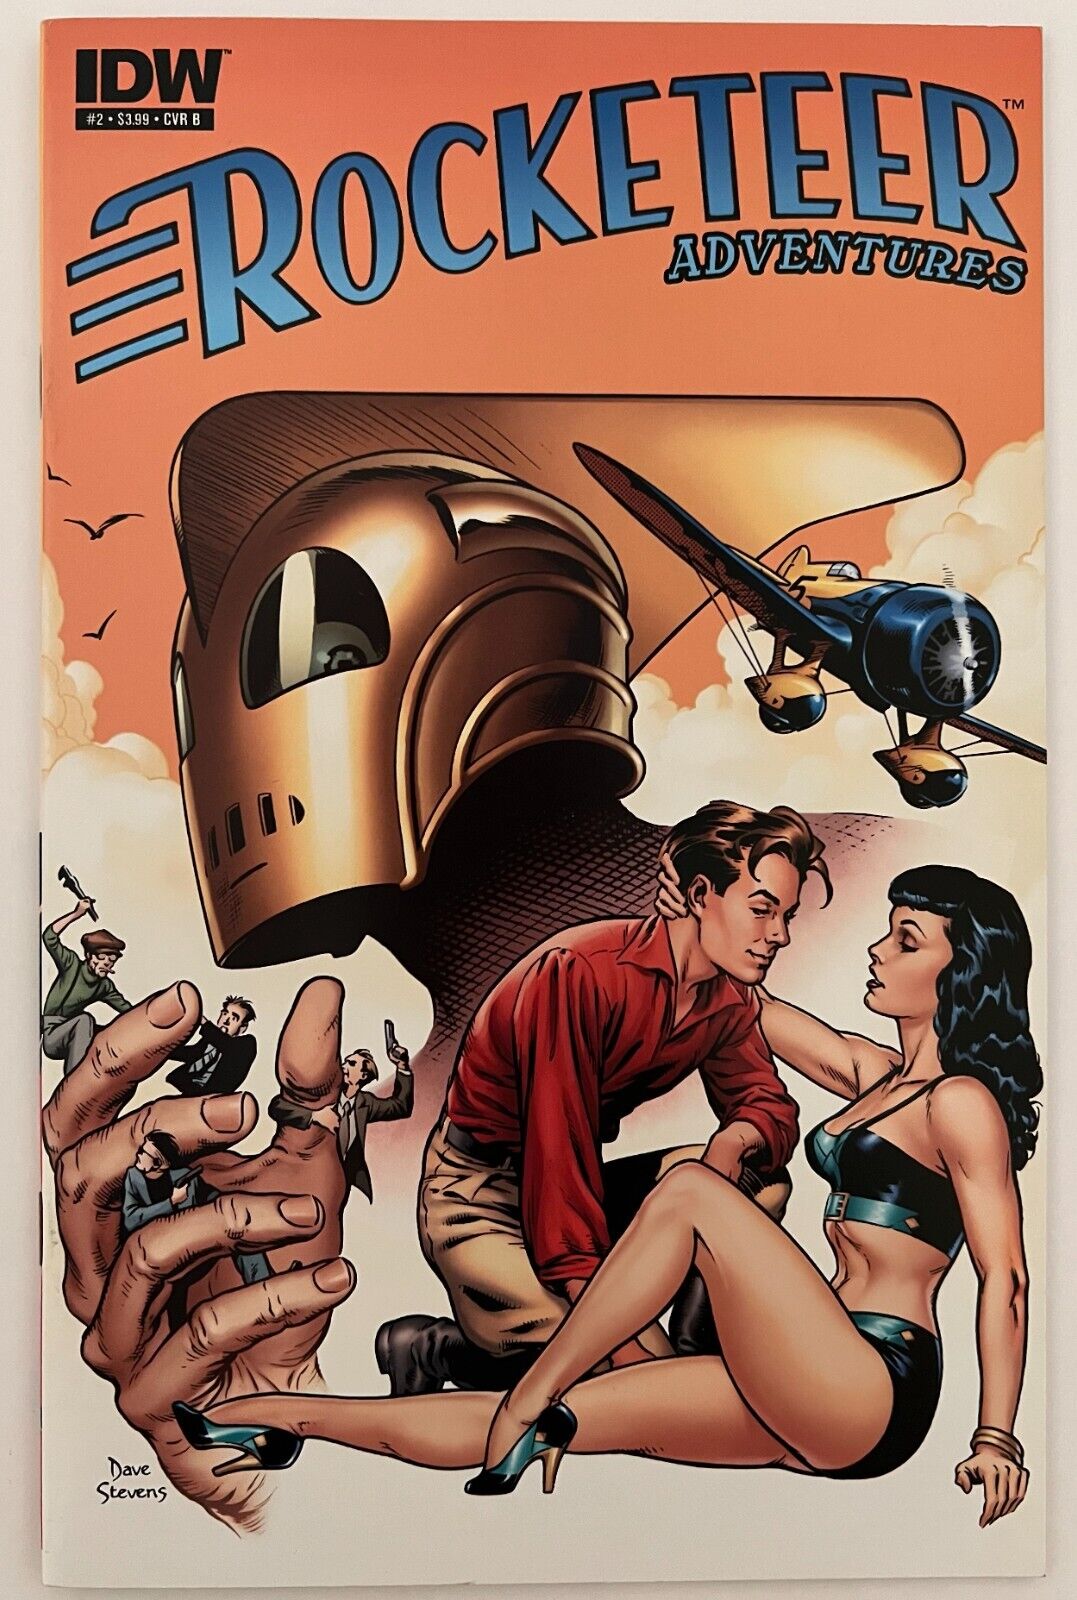 ROCKETEER ADVENTURES #2 Variant VF/NM 9.0 Dave Stevens Cover IDW HOT